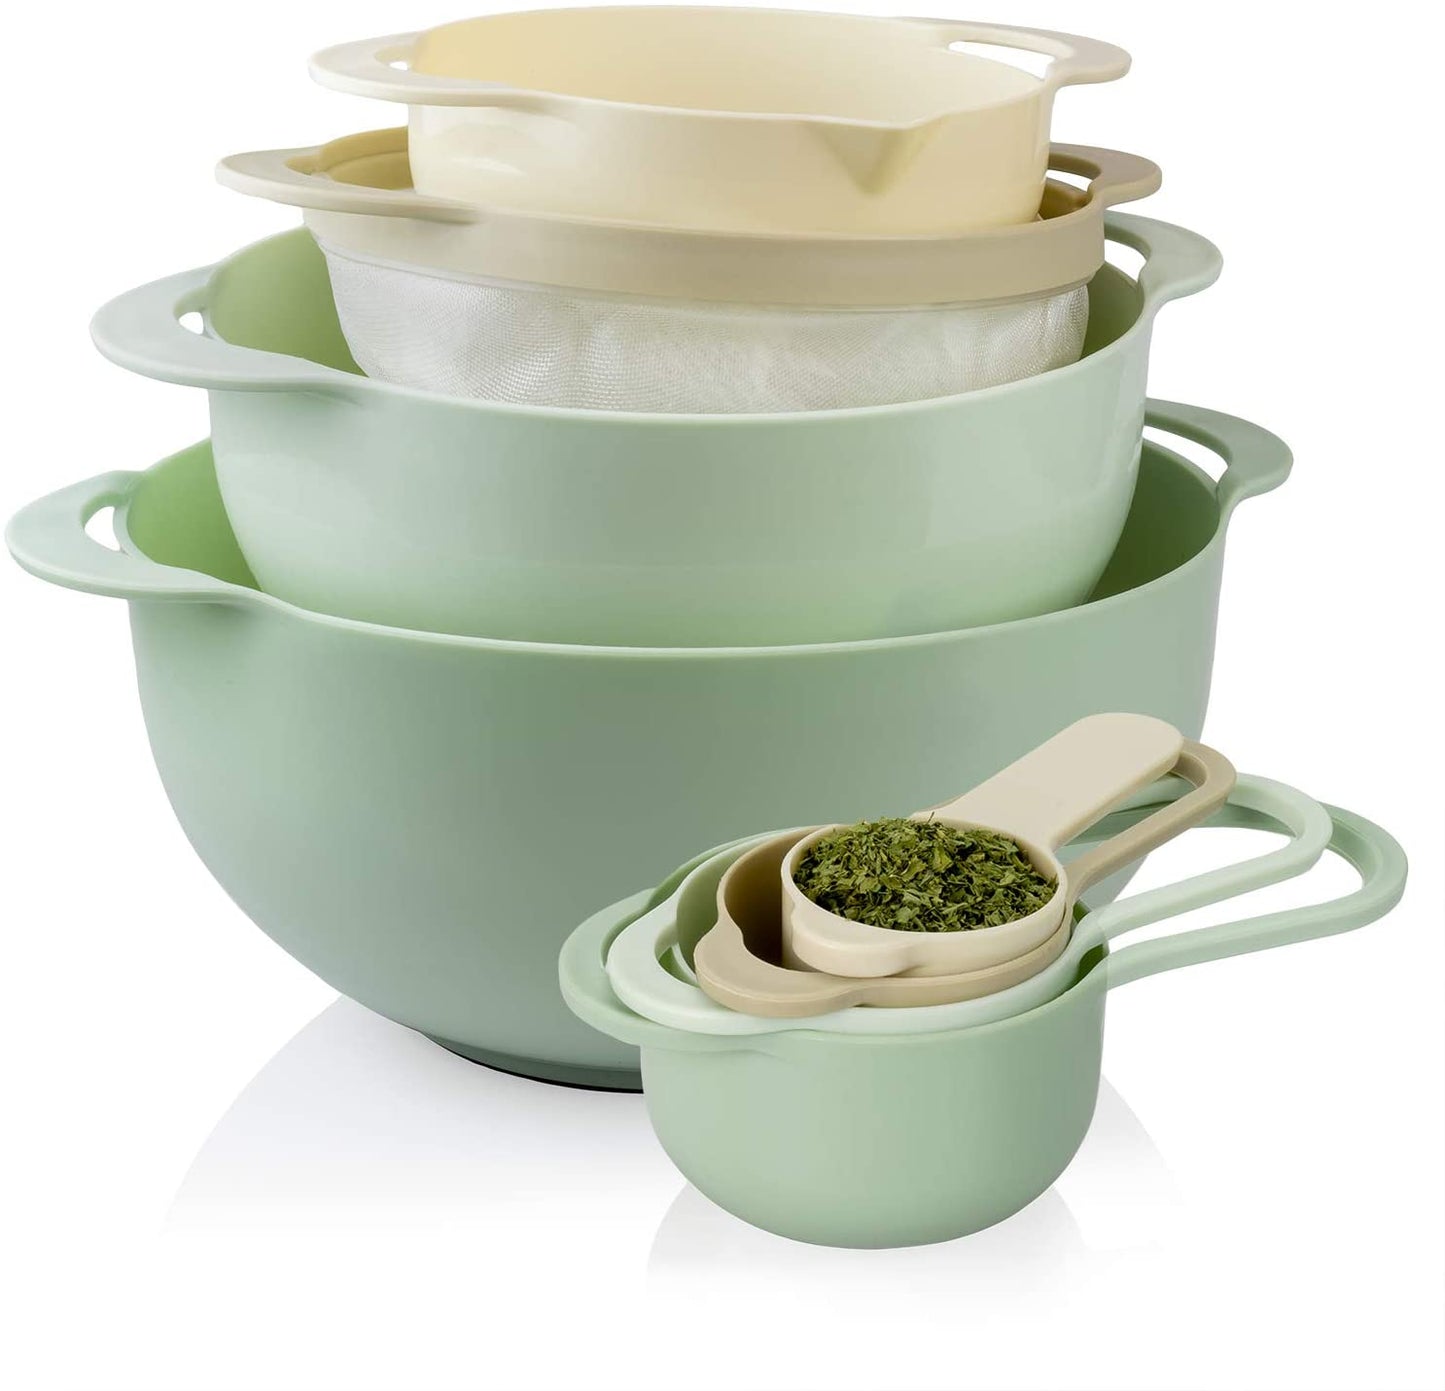 8 Piece Nesting Bowls with Measuring Cups Colander and Sifter Set